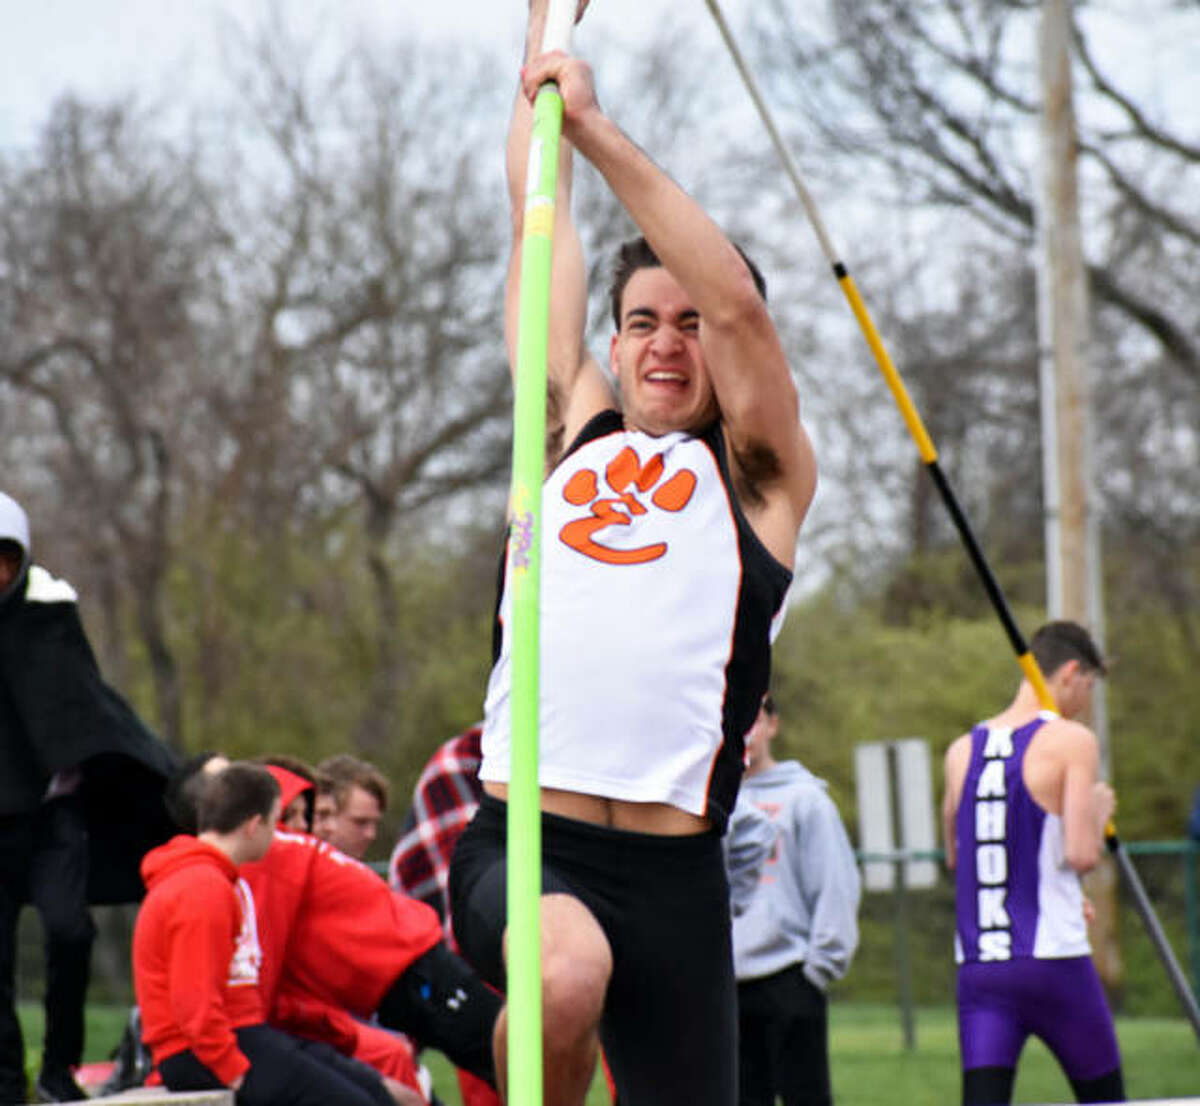 Blake Neville qualified for state in the pole vault two times, finishing 11th in his senior season in 2018 and 12th as a junior in 2017.